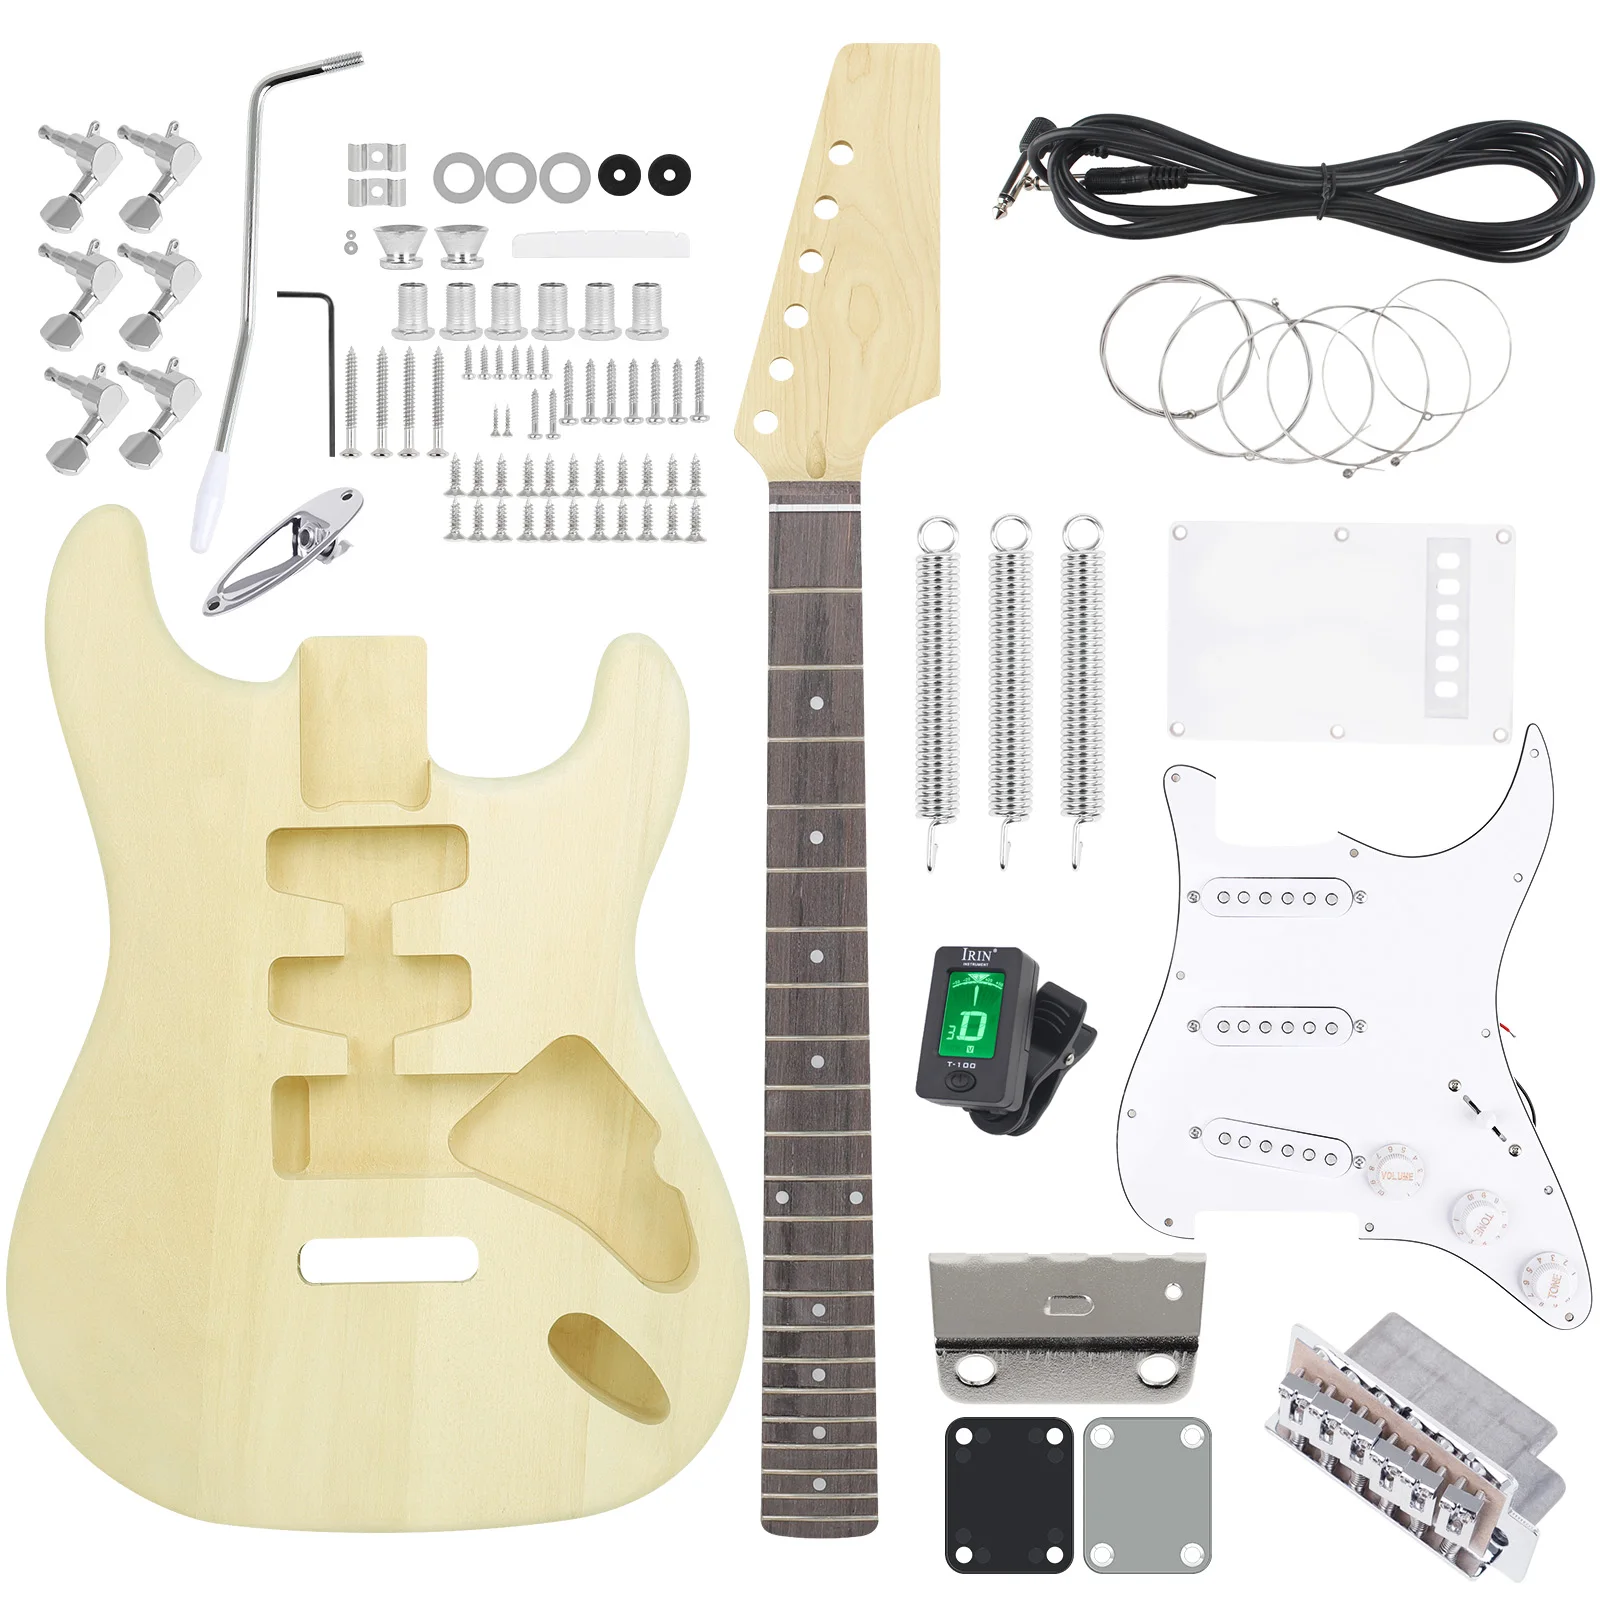 DIY Electric Guitar Kit ST 6 Strings 22 Frets Fingerboard Basswood Neck Body Electric Guitar Guitarra With Connecting Cable